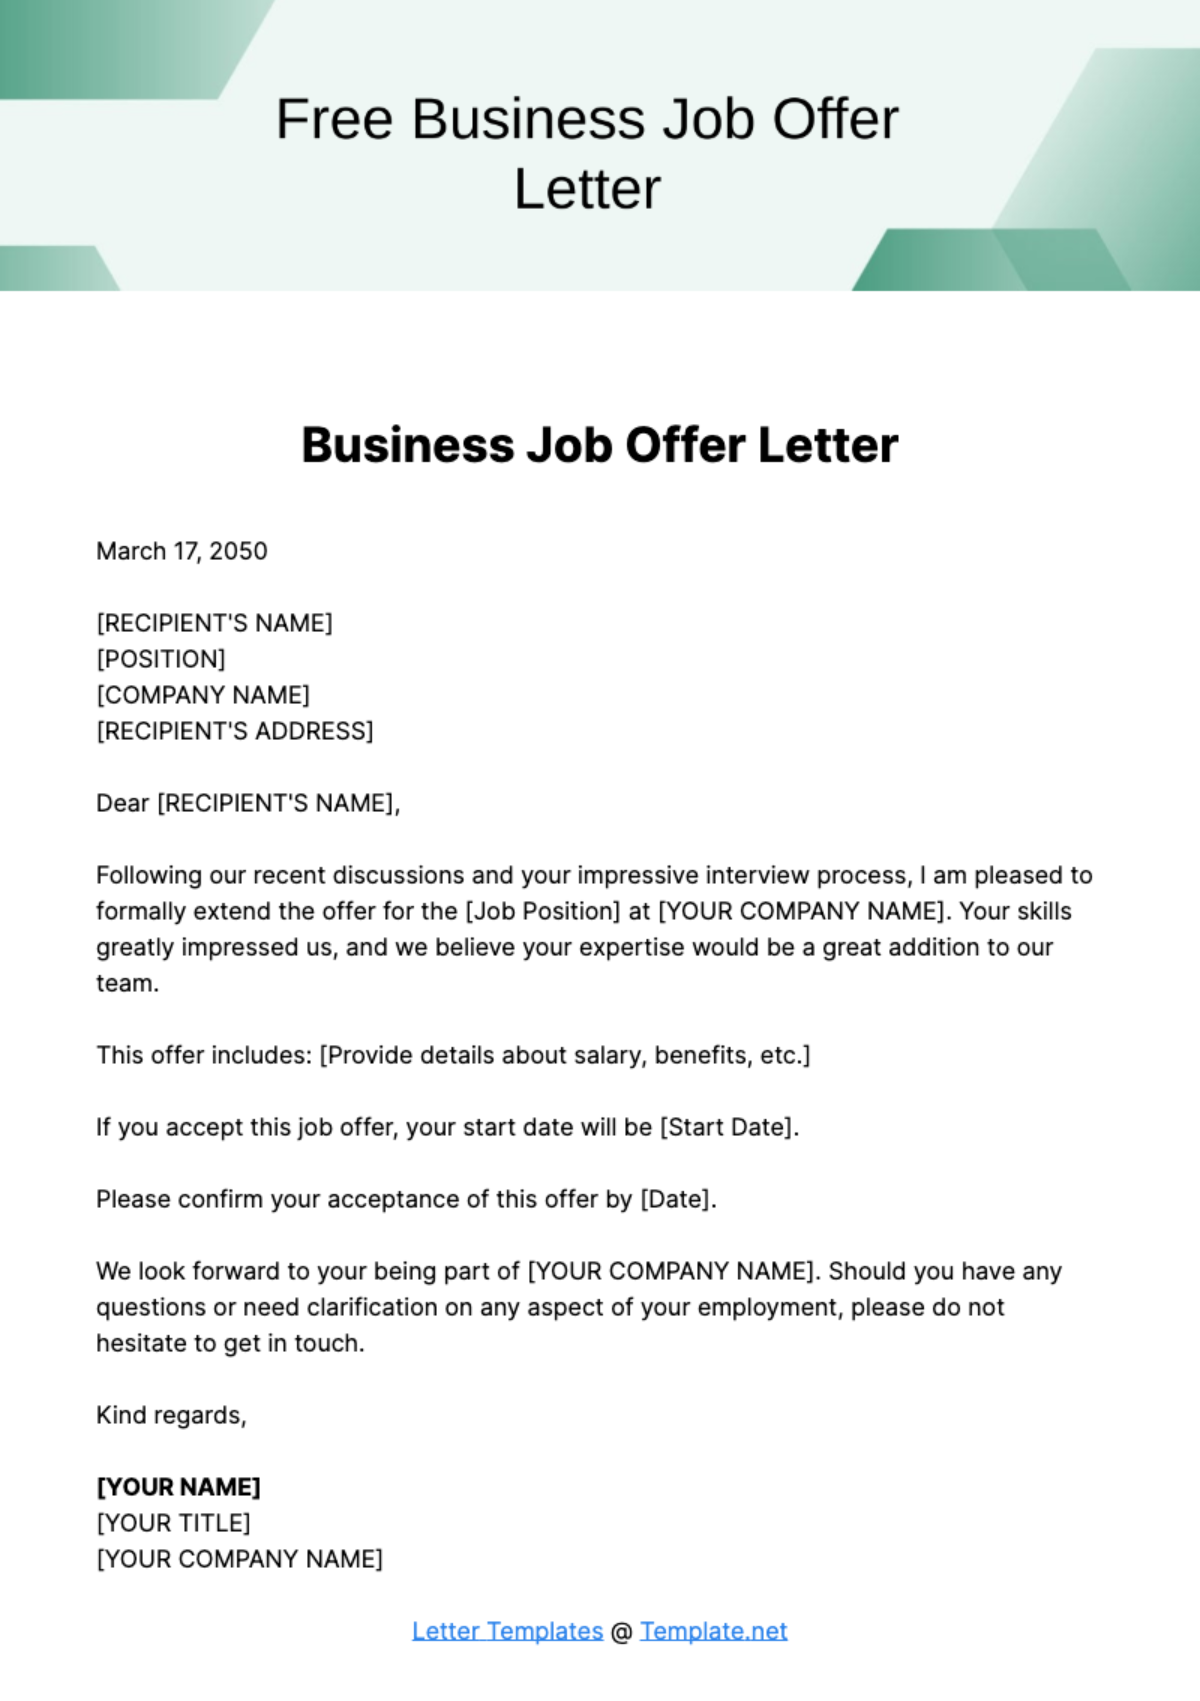 Free Business Job Offer Letter Template